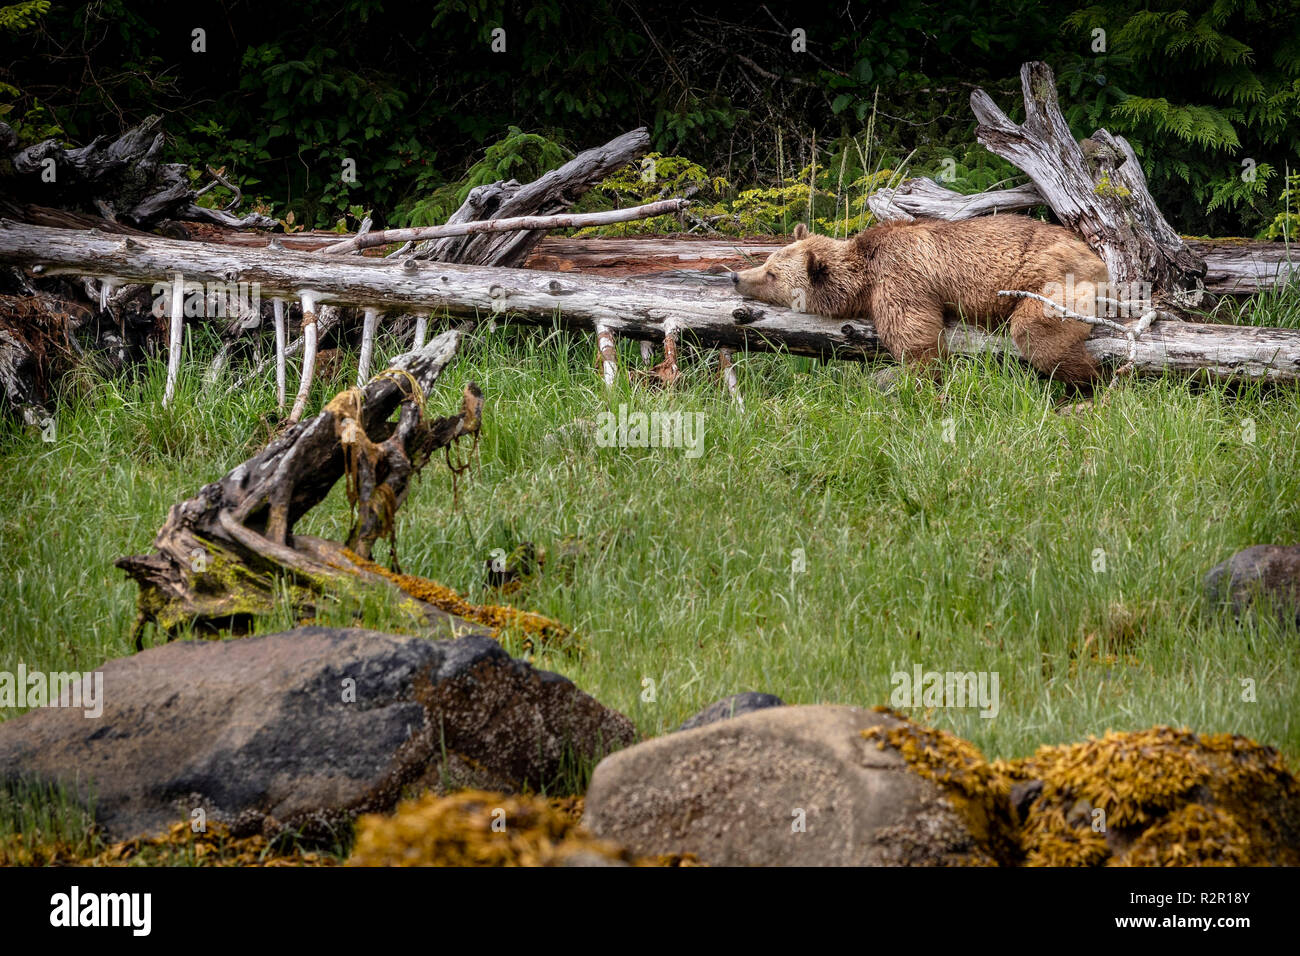 Grizzly bear sleeping in Glendale Cove, Knight Inlet, First Nations Territory, British Columbia, Canada Stock Photo